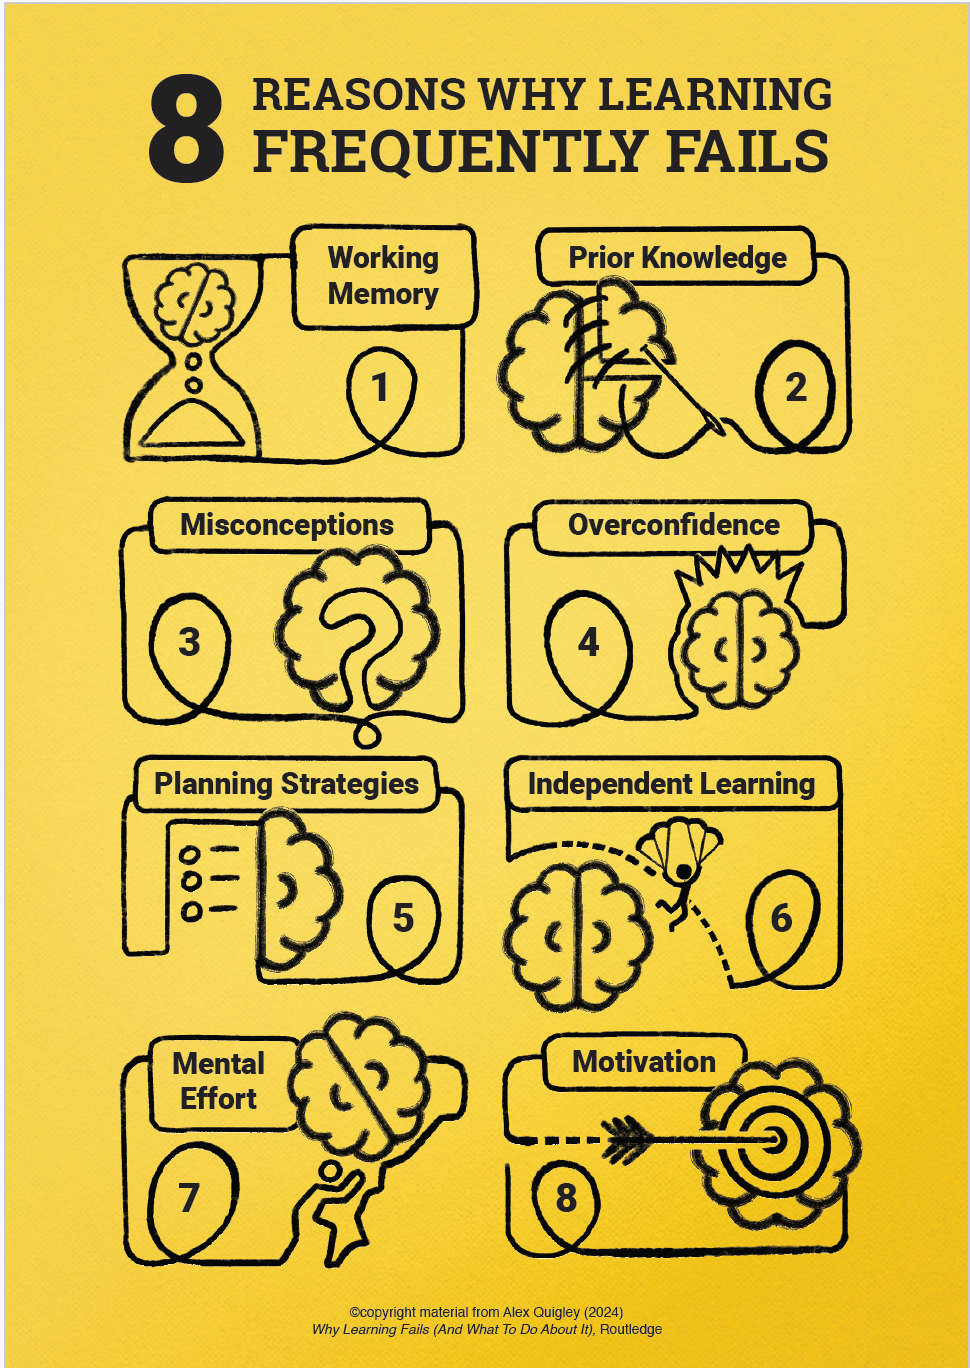 Infographic of the 8 reasons for learning failures